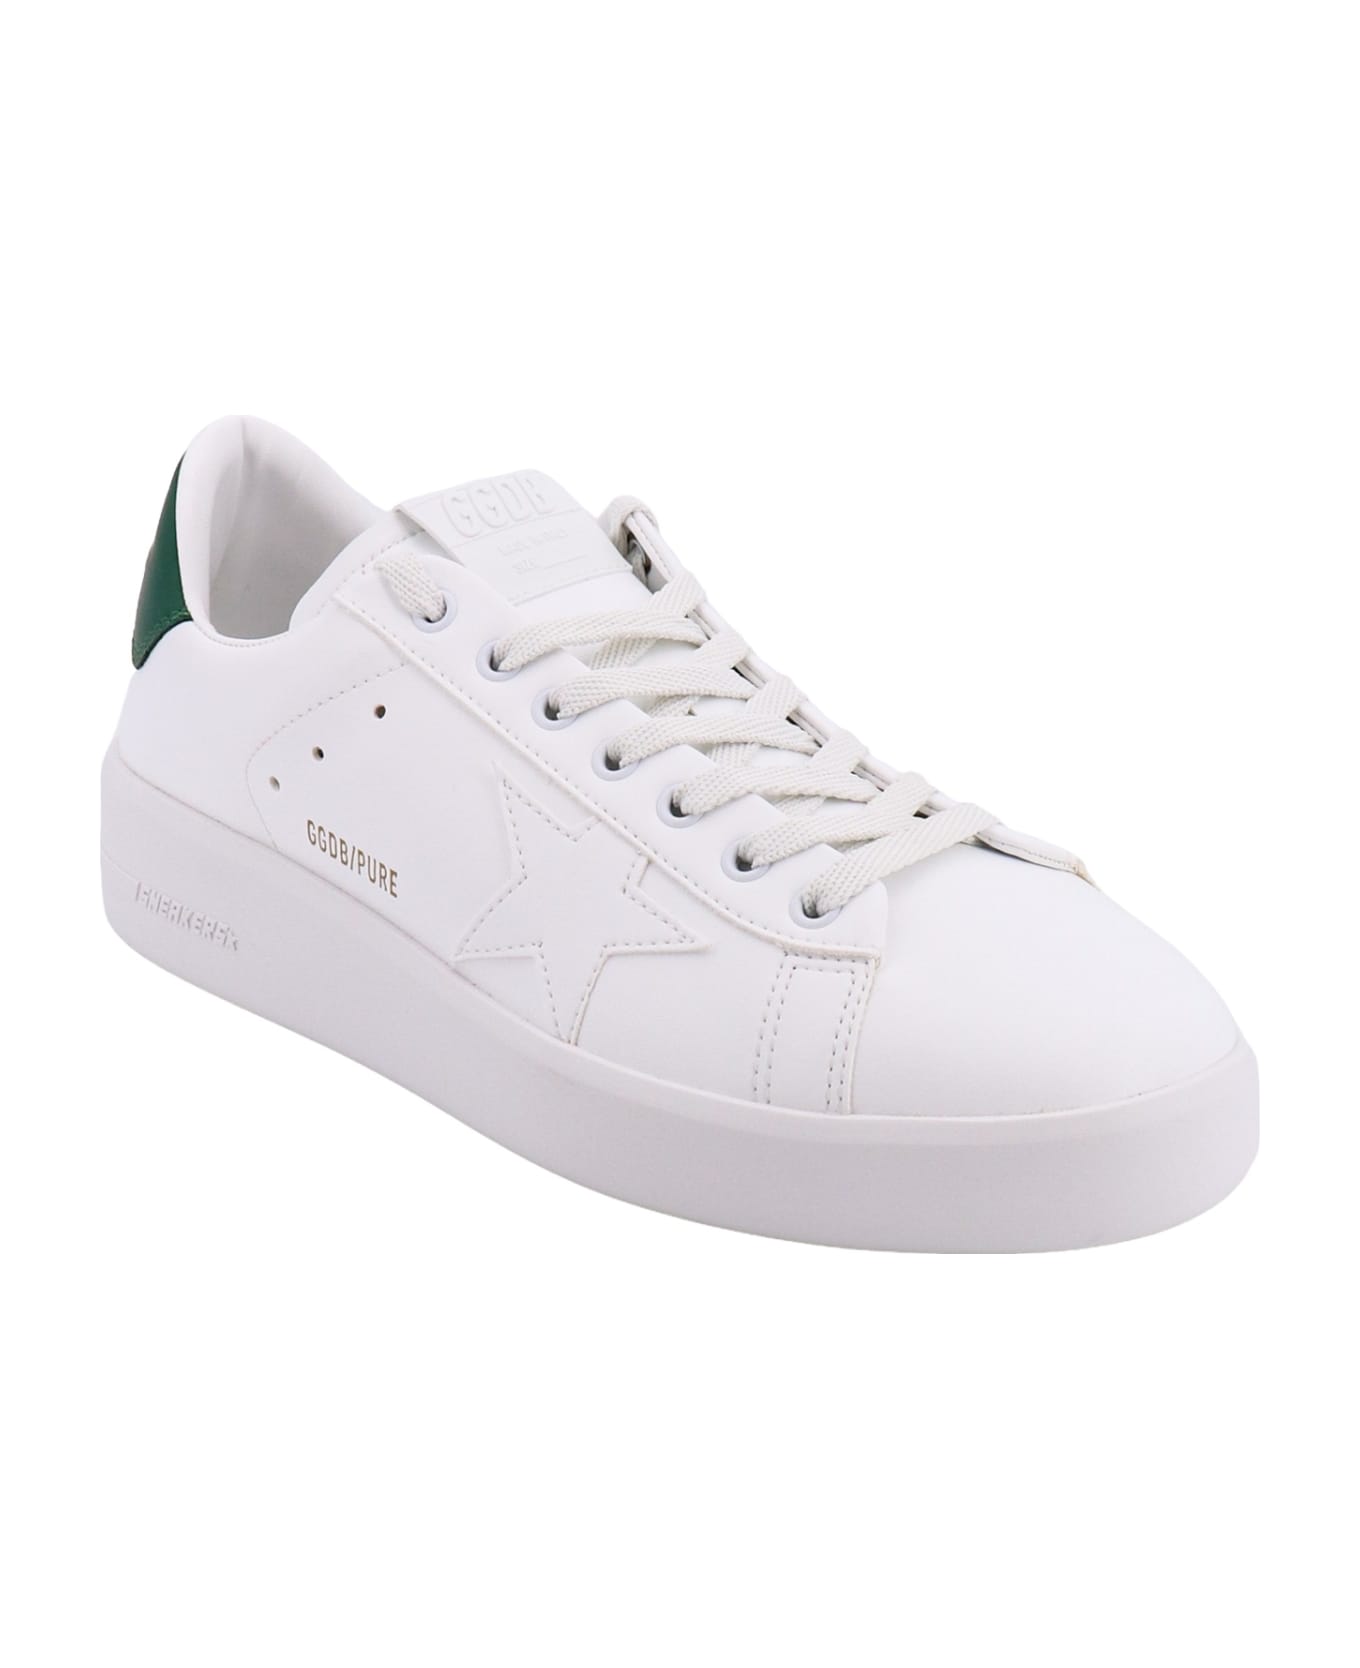 Golden Goose Pure New Sneakers - WHITE/GREEN